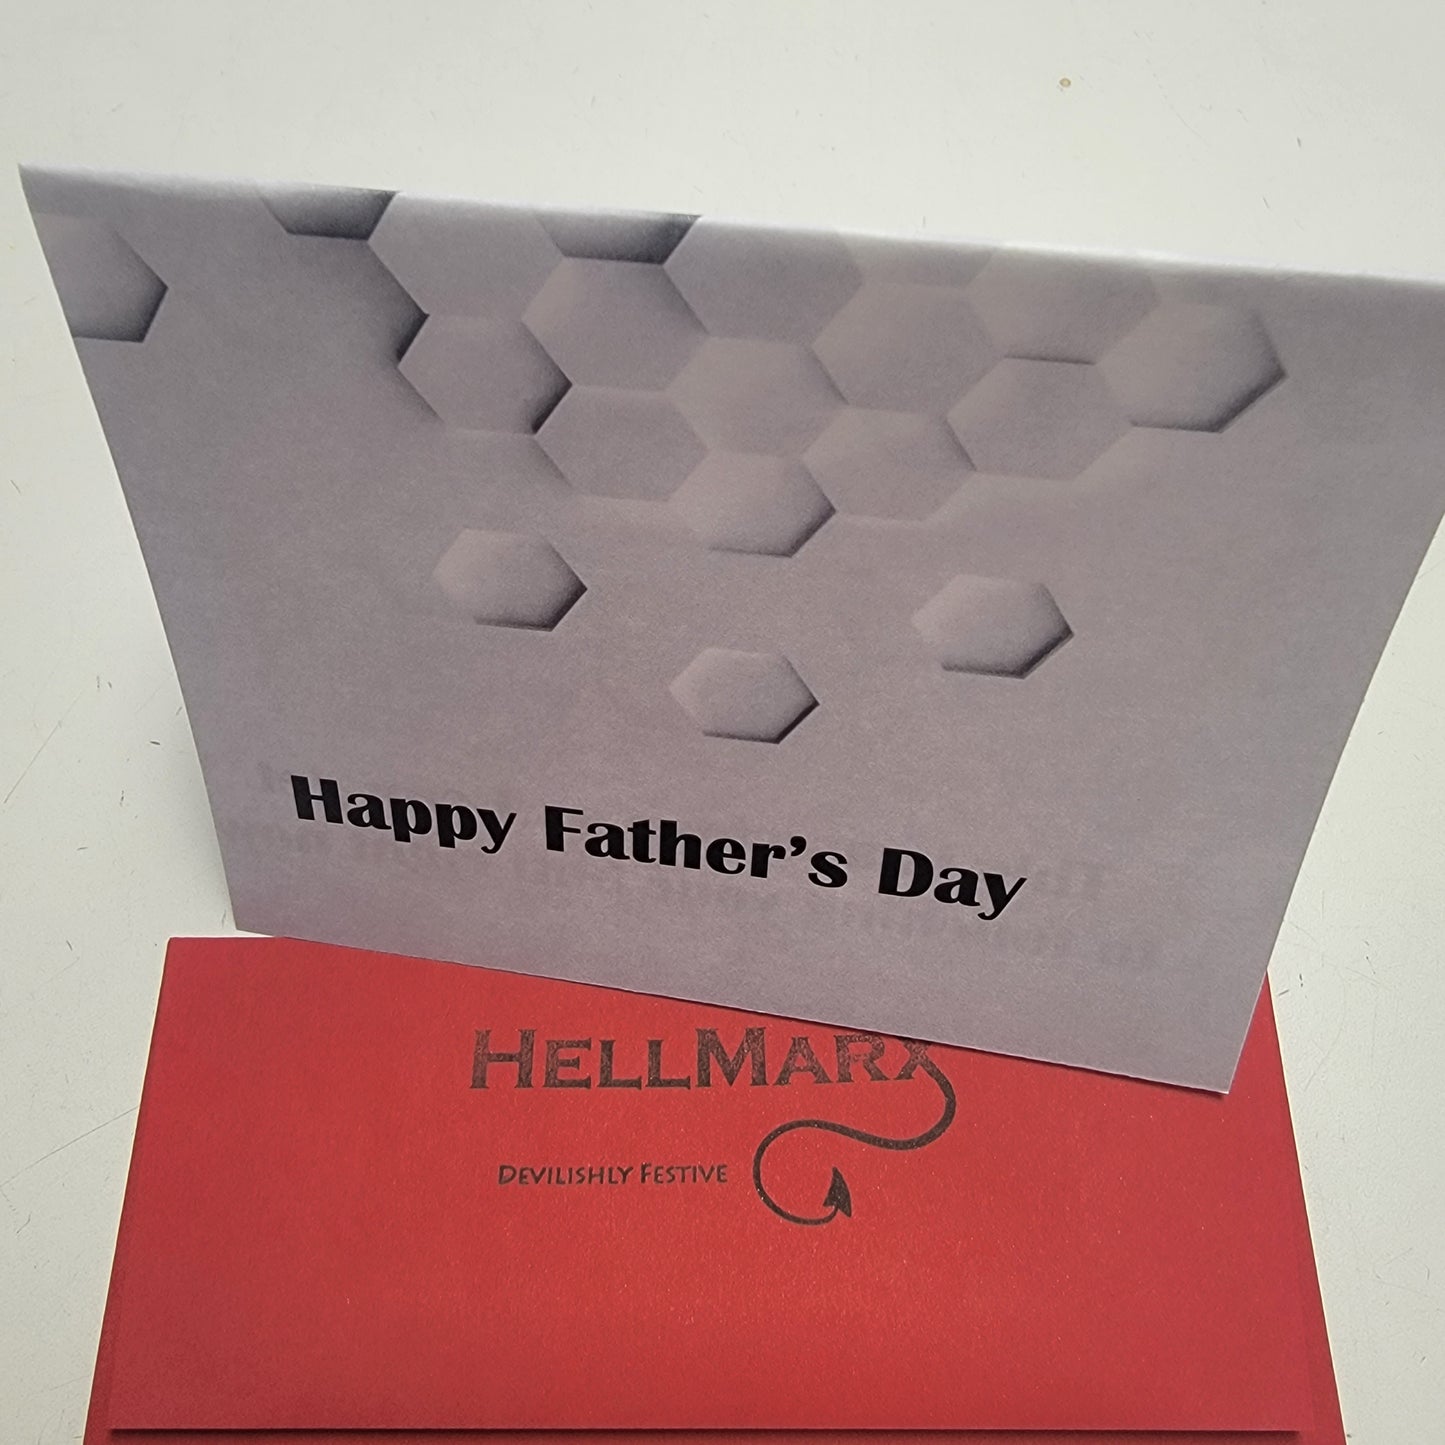 Hellmarx Leather Wallet and Card